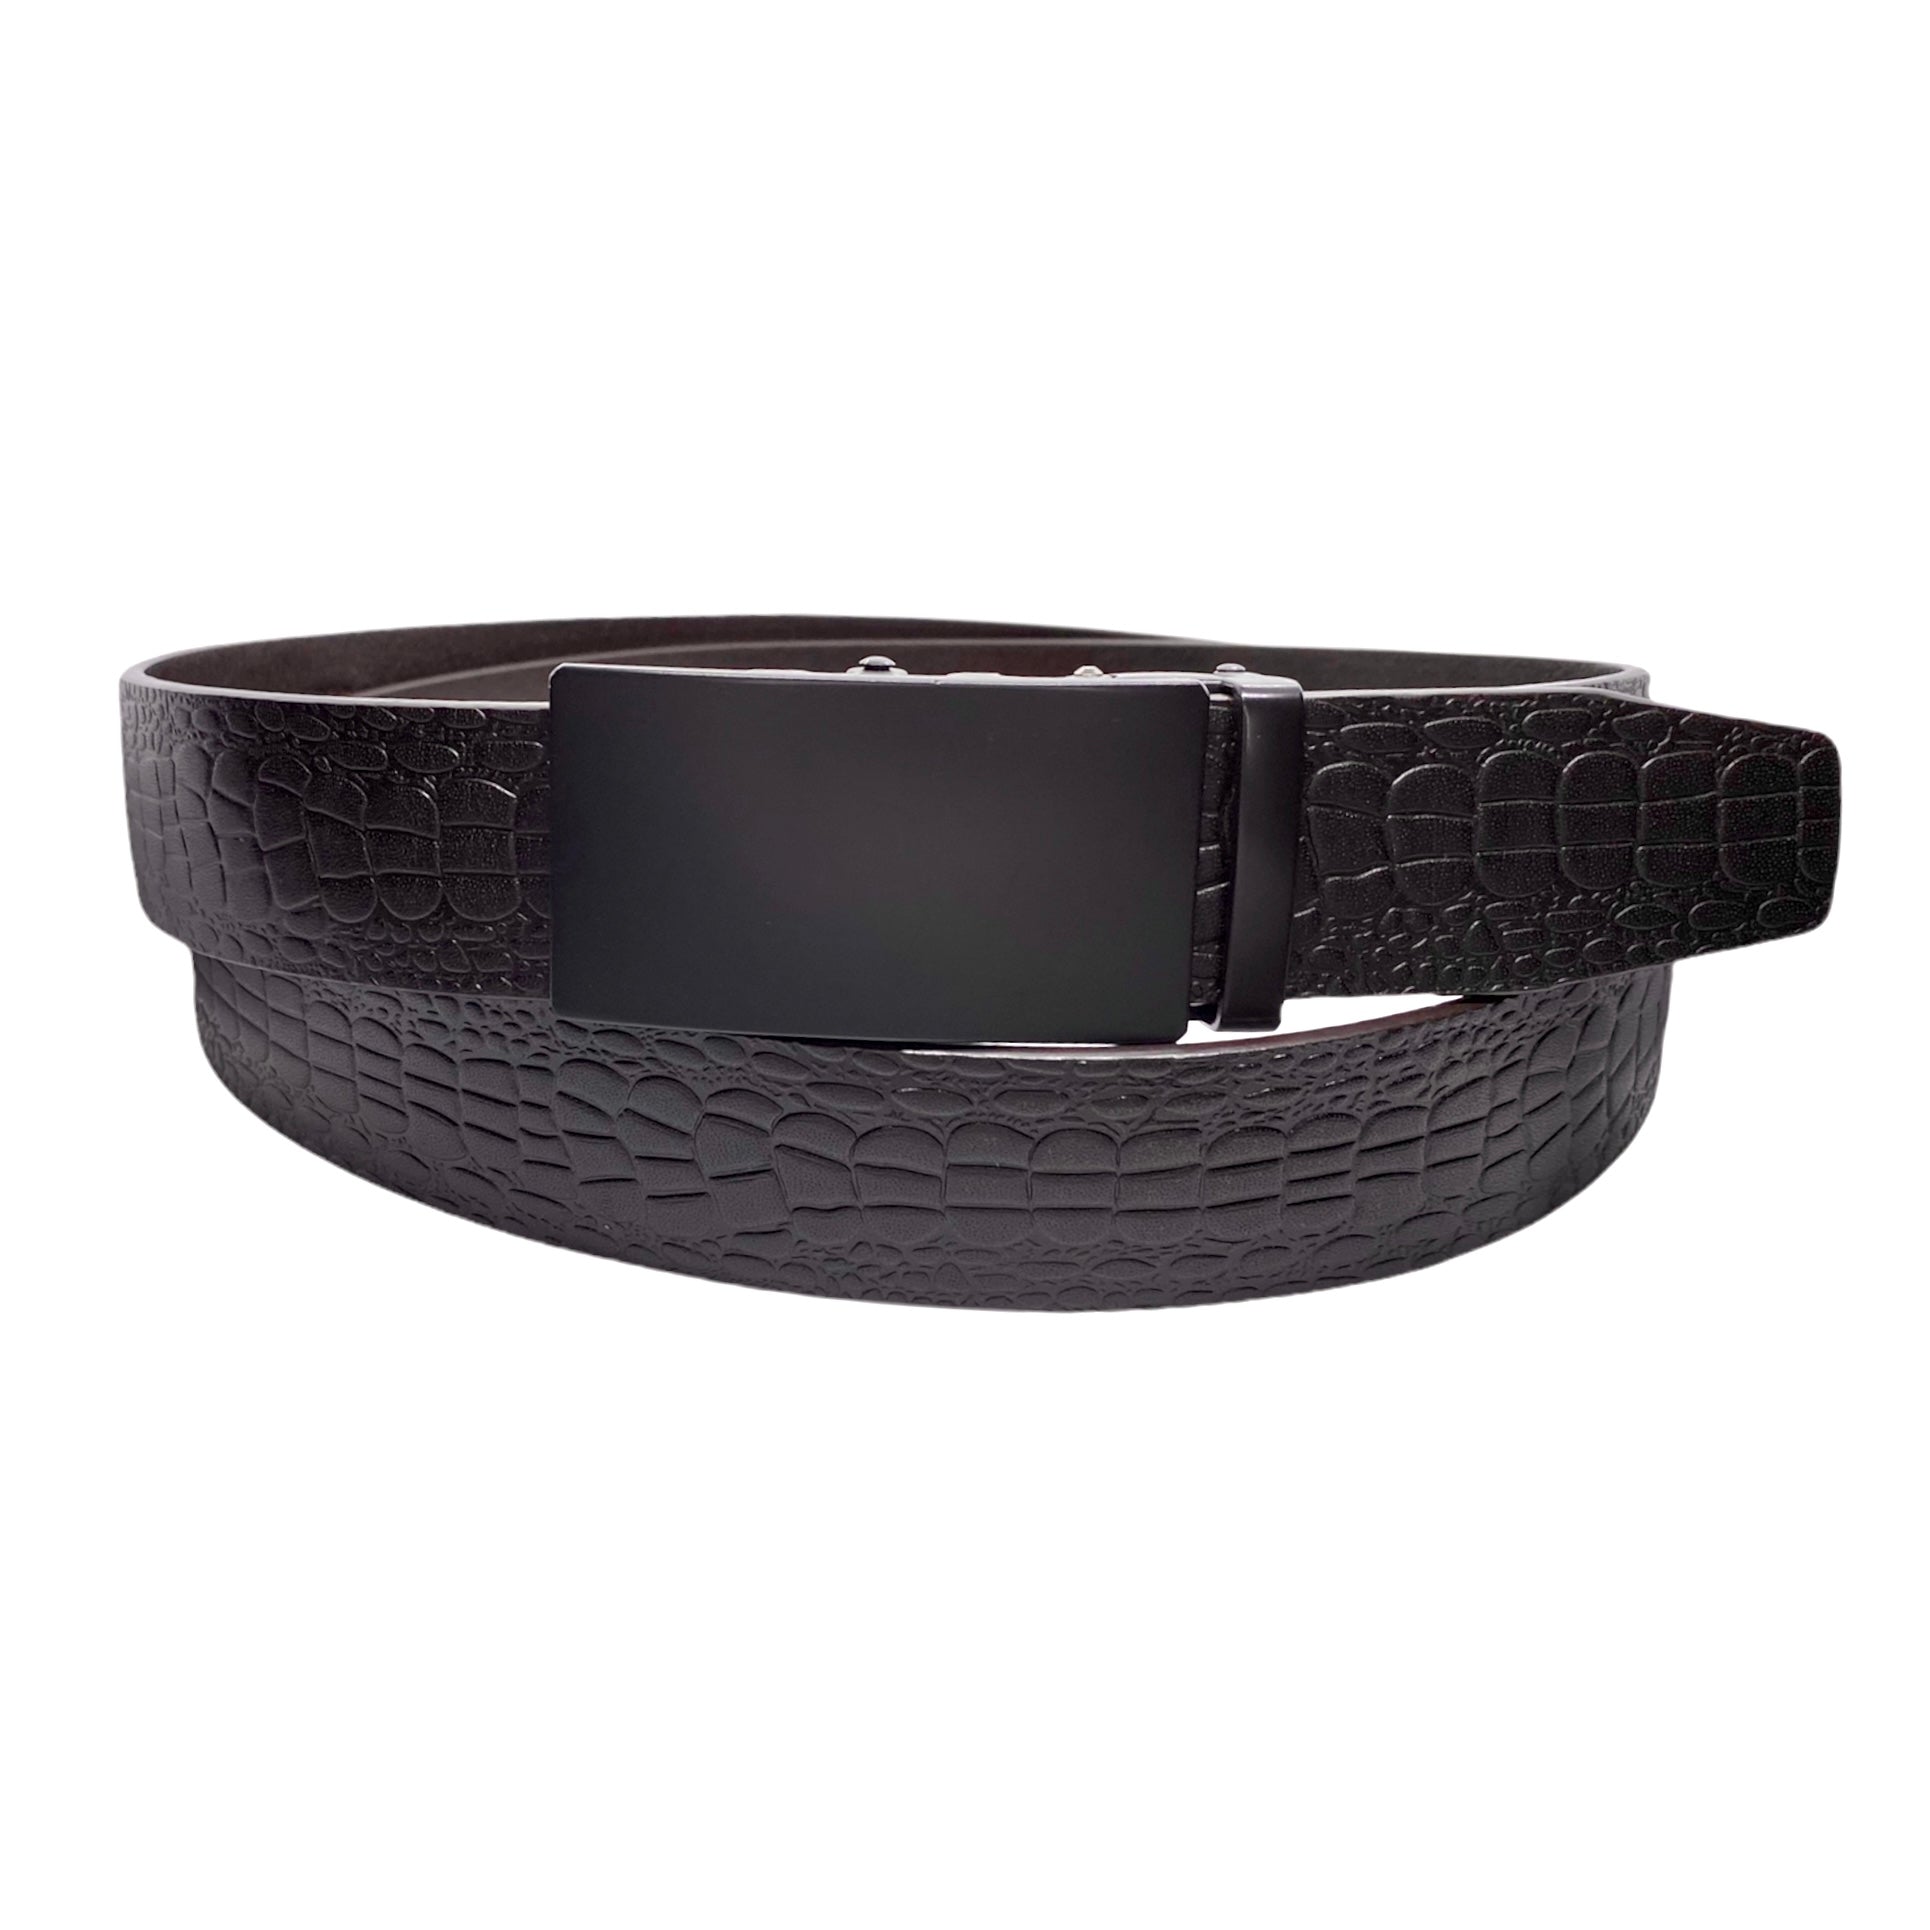 1.38" Genuine Leather Dark Brown Textured Strap And 1.38" Automatic Belt Buckle Black 24710822854807